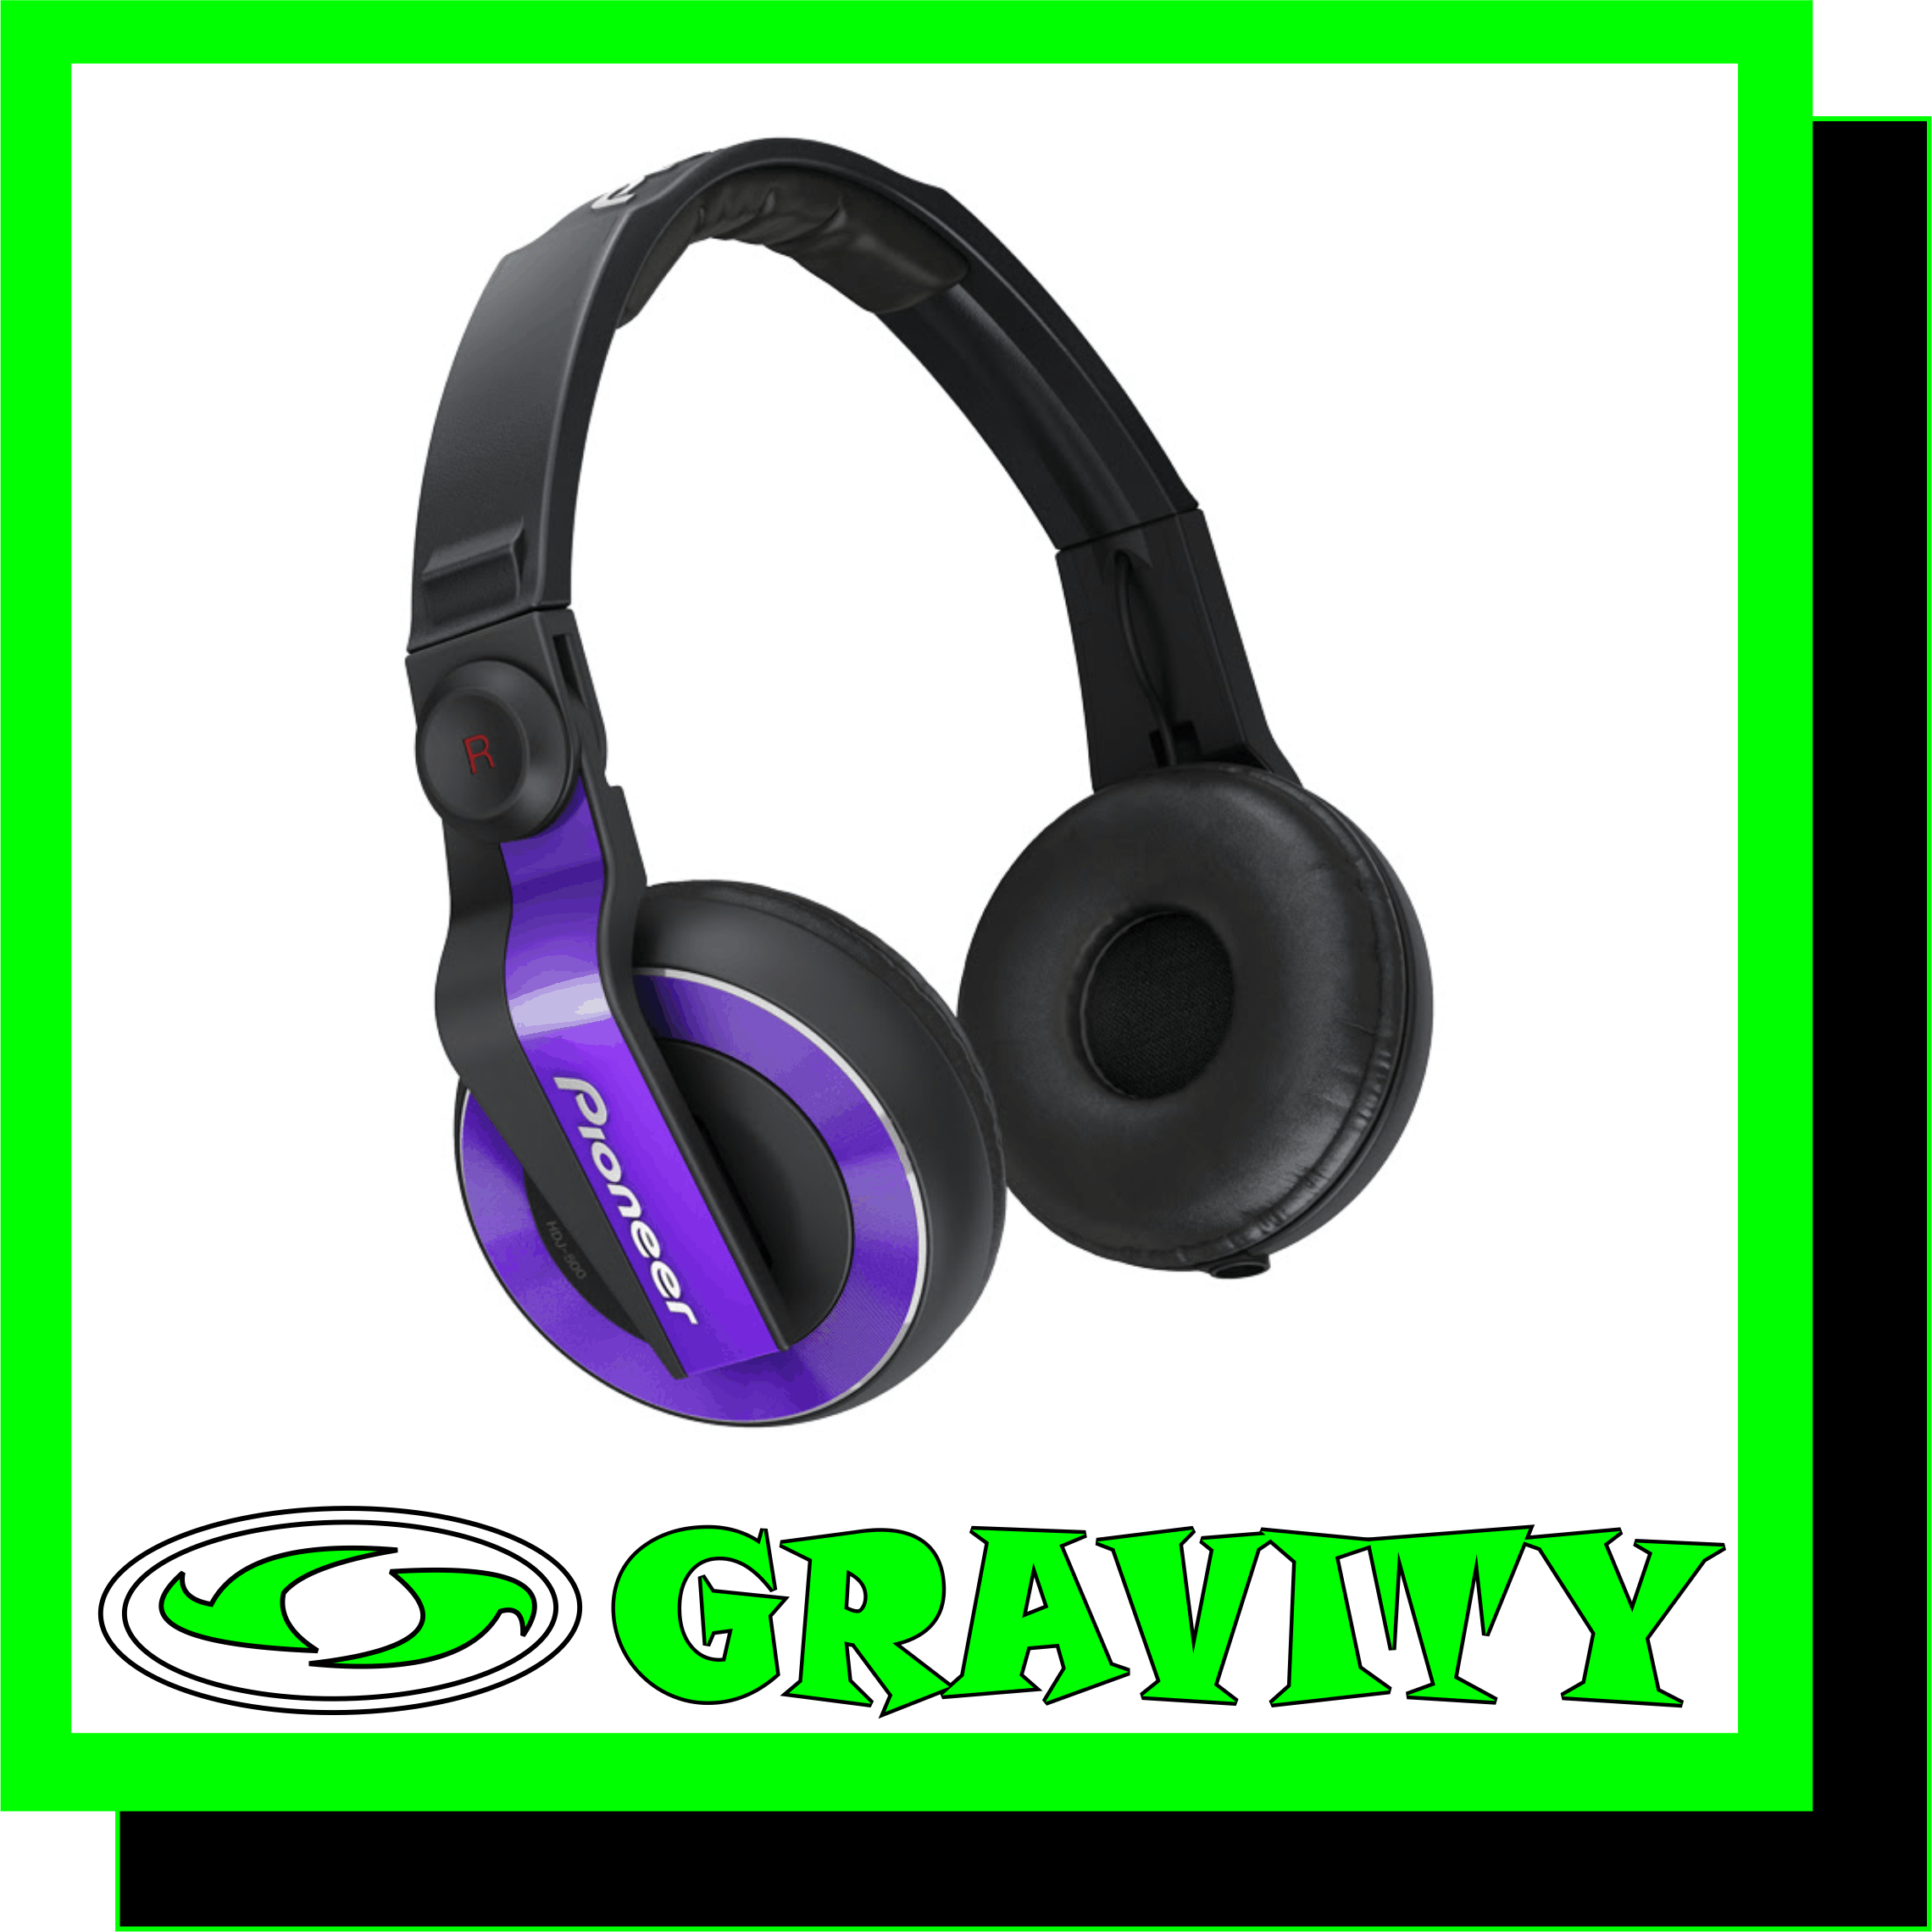 HDJ500V @ R2 350.00  DJ Headphones   Refined Design for Maximum Comfort & Reliability Advanced Sound Quality with low & mid ranges Right earpiece rotates forward and back up to 60 degrees Includes 1m straight leisure cord & coiled DJing cord GRAVITY SOUND AND LIGHTING WAREHOUSE 0315072463